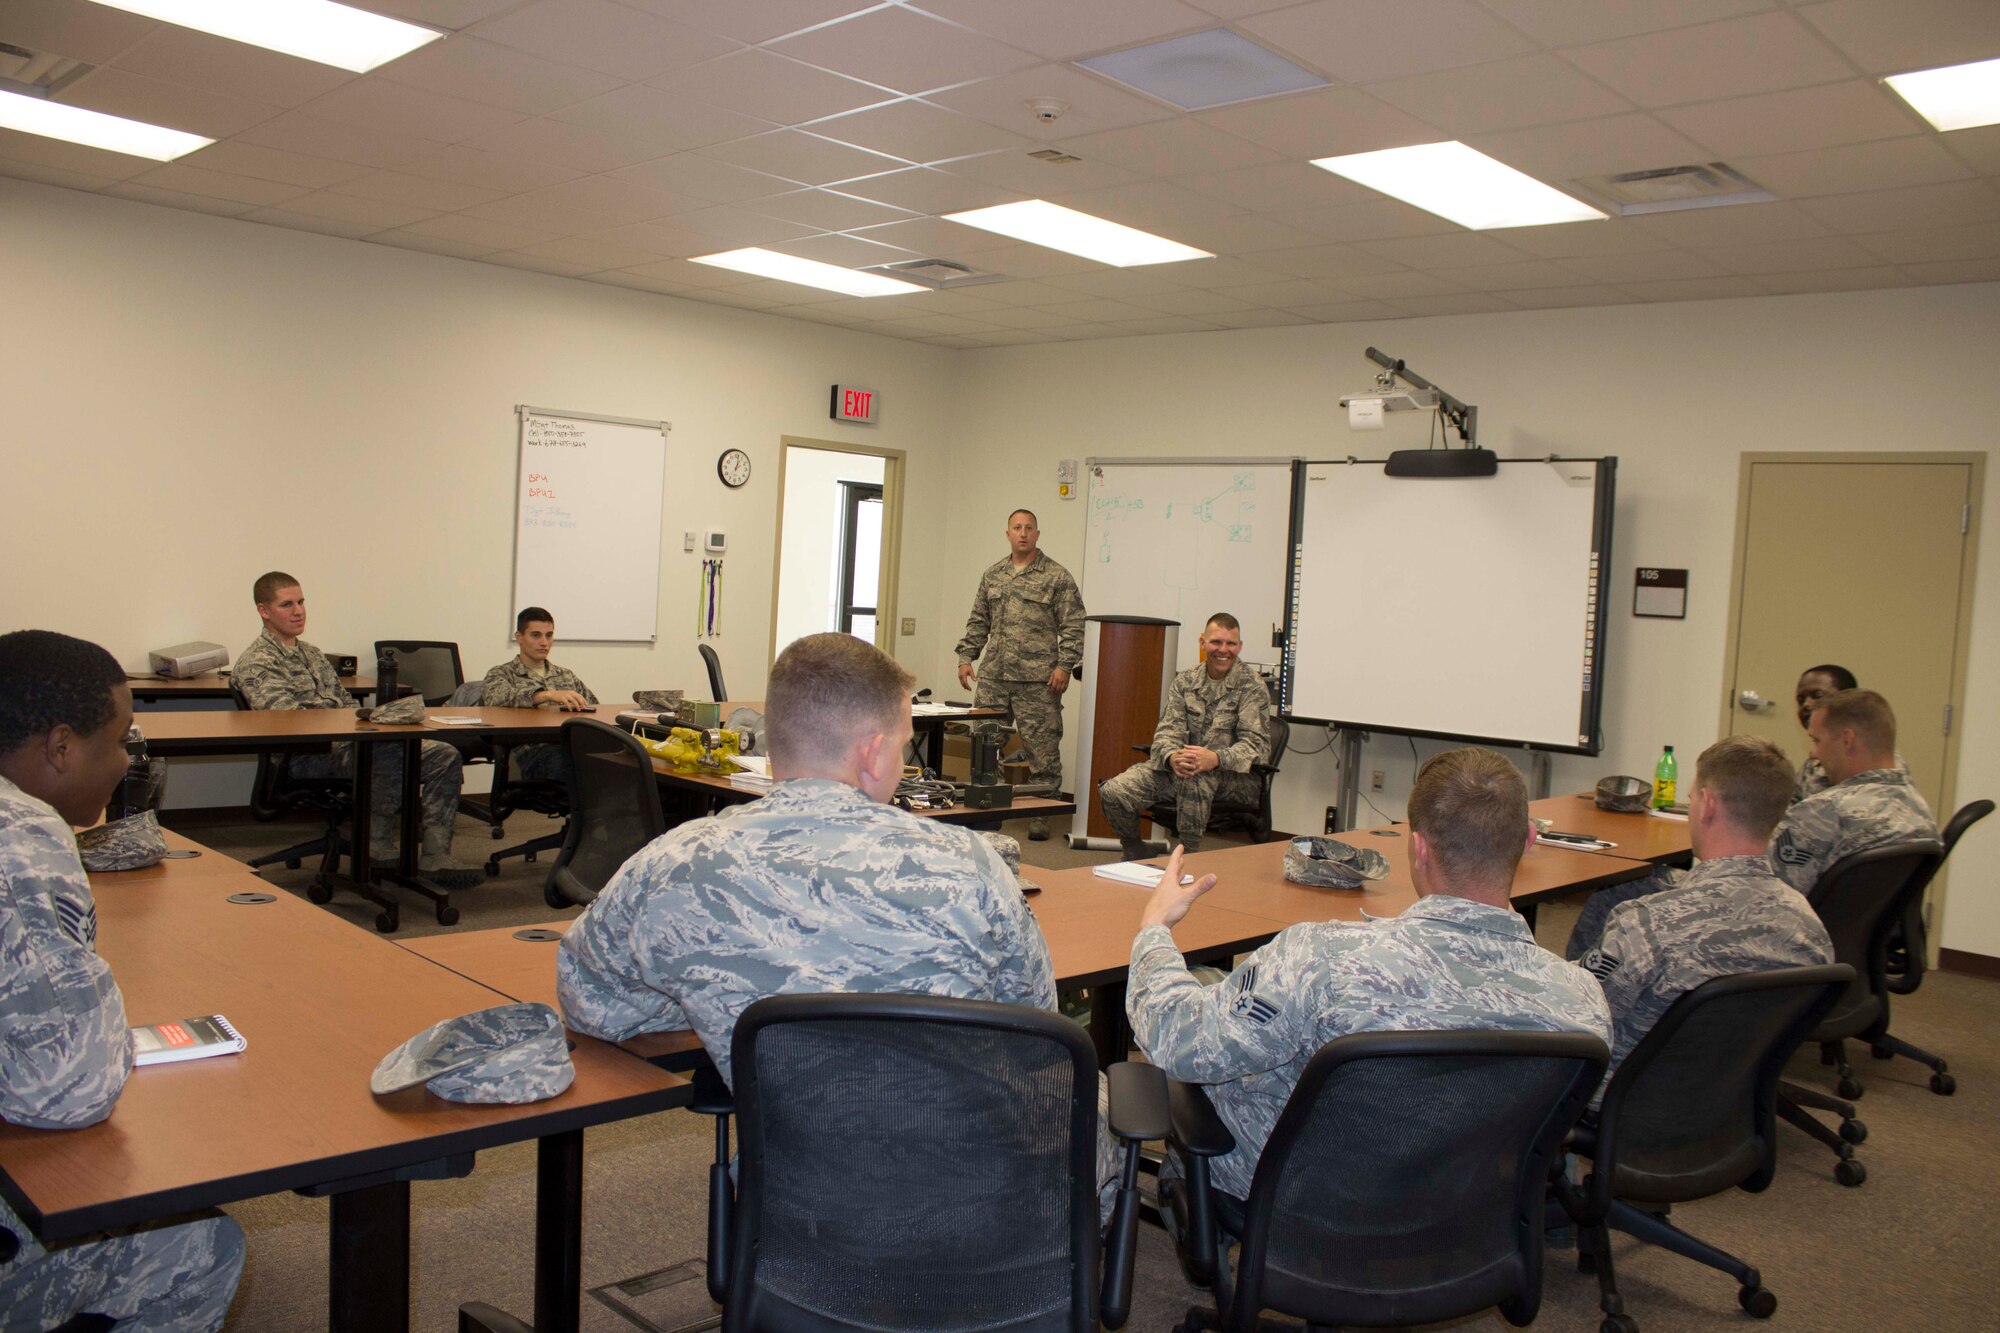 Power production Airmen at Dobbins ARB, Georgia, had a chance to discuss training development and express their concerns during a visit from Senior Master Sgt. Stewart Herringshaw, civil engineer power production force development manager from the Air Force Civil Engineer Center’s Operations Directorate. The one-on-one time was held at the base and provided career field information for Airmen. (U.S. Air Force photo/Susan Lawson)